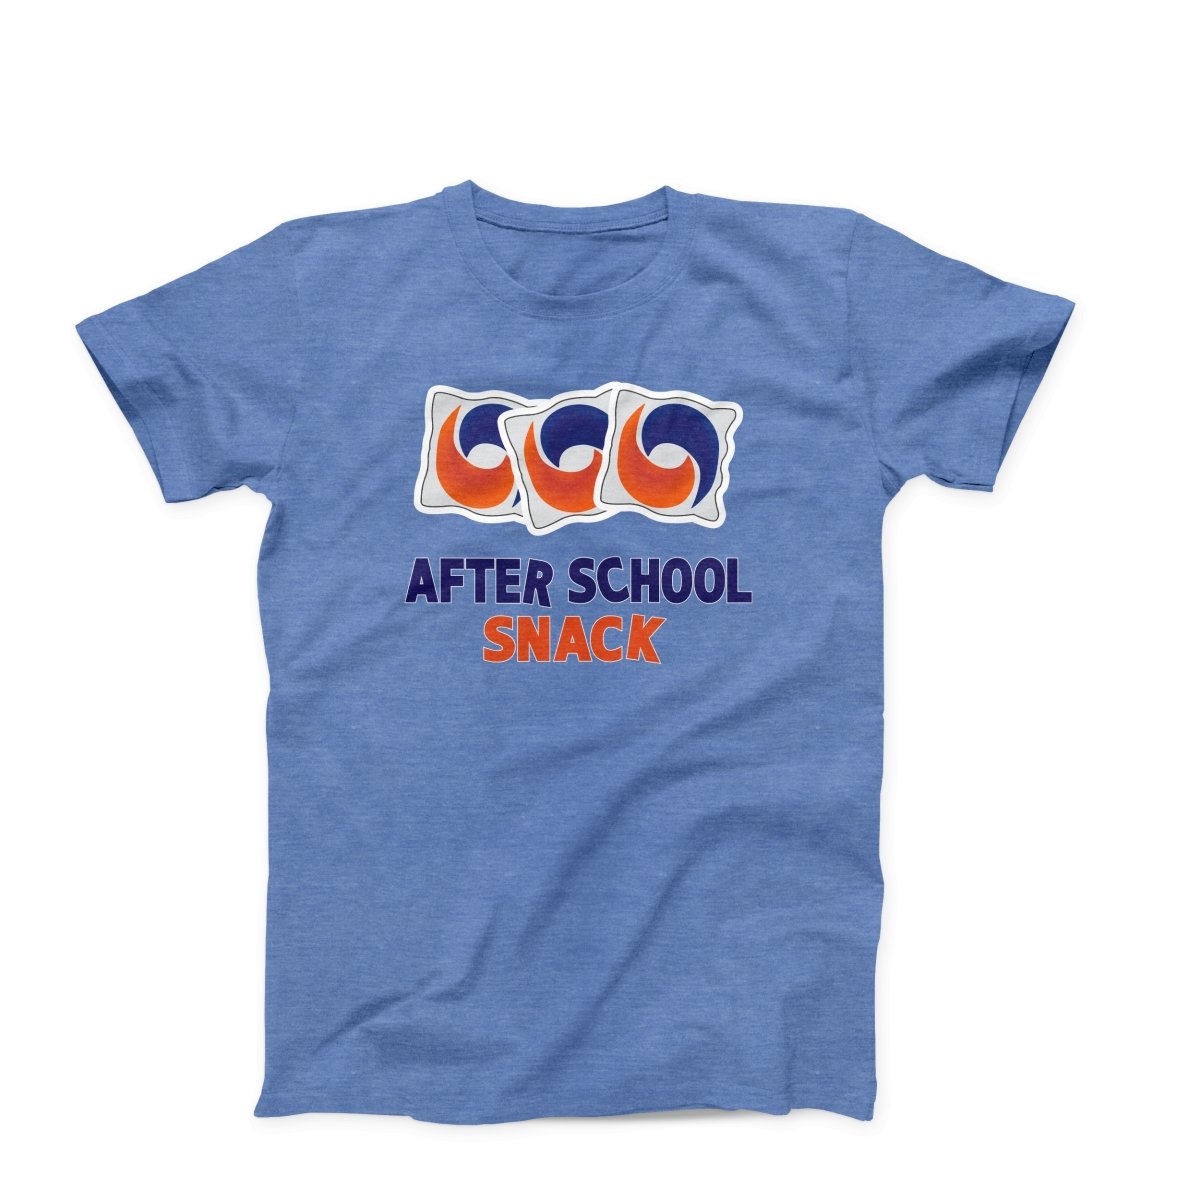 After School Snack Adult Unisex T-Shirt - Twisted Gorilla